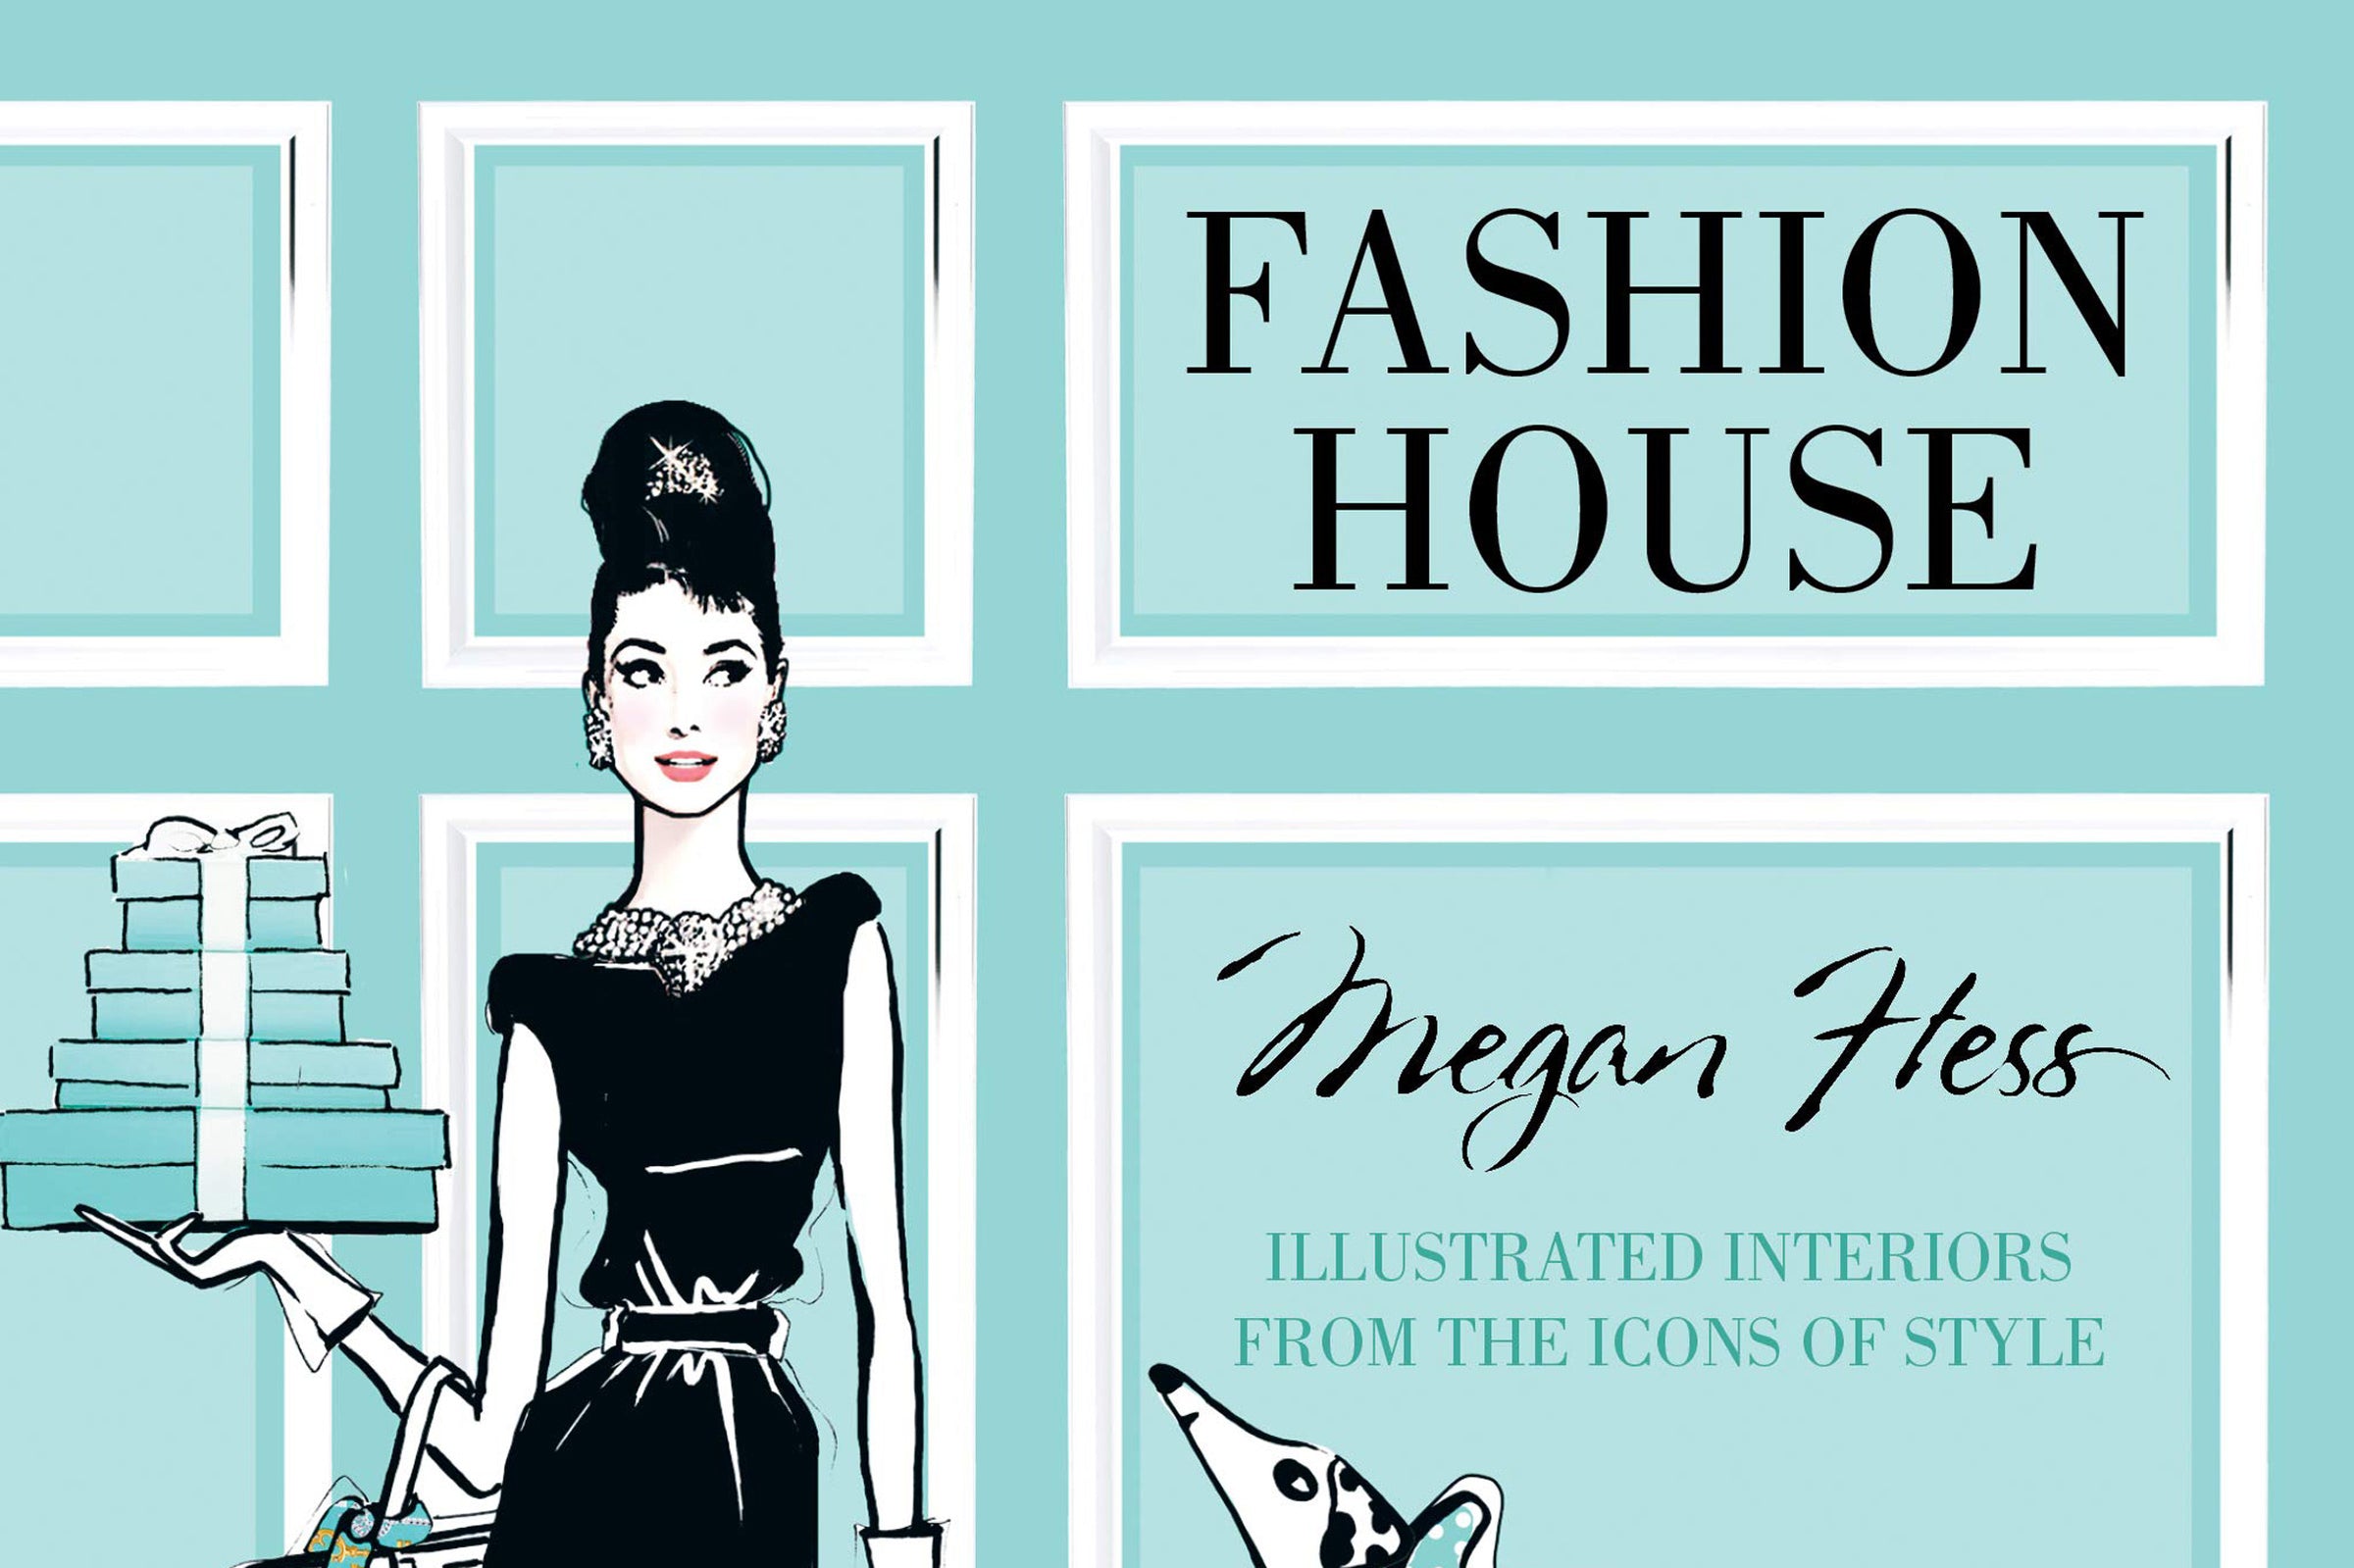 Audrey Hepburn: Icons Of Style, For Fans Of Megan Hess, The Little